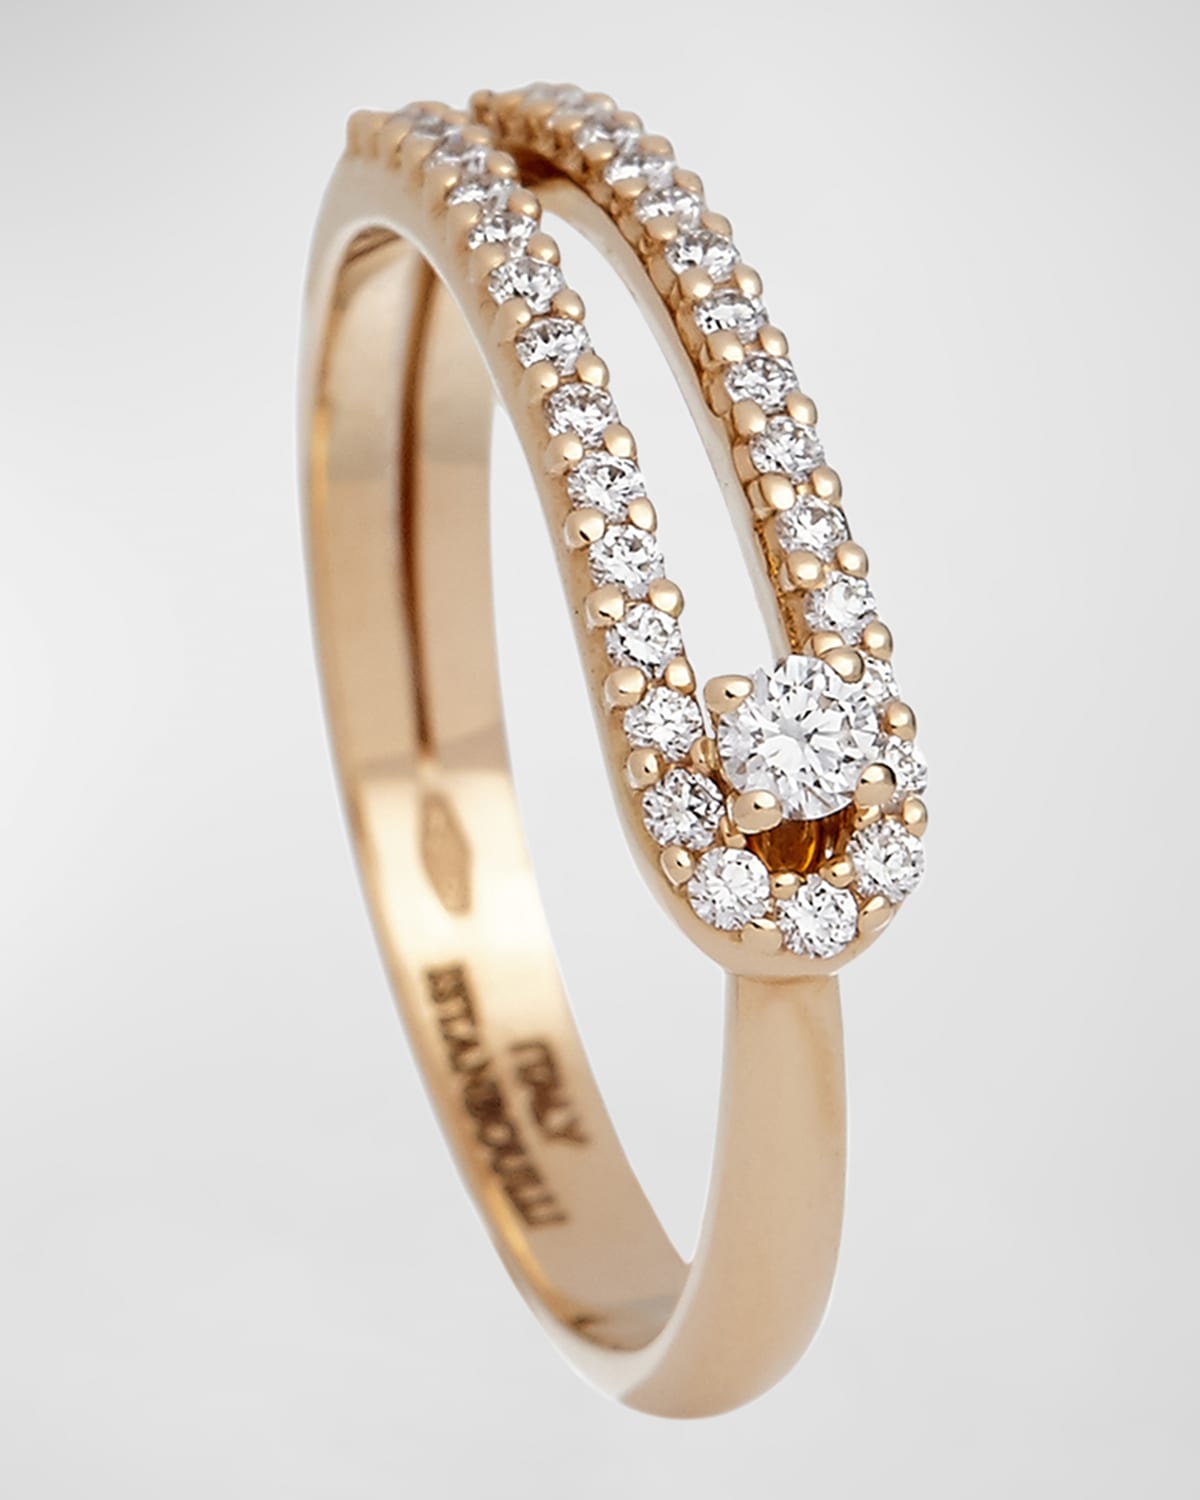 18K Yellow Gold Narrow Ring with Diamonds, Size 6